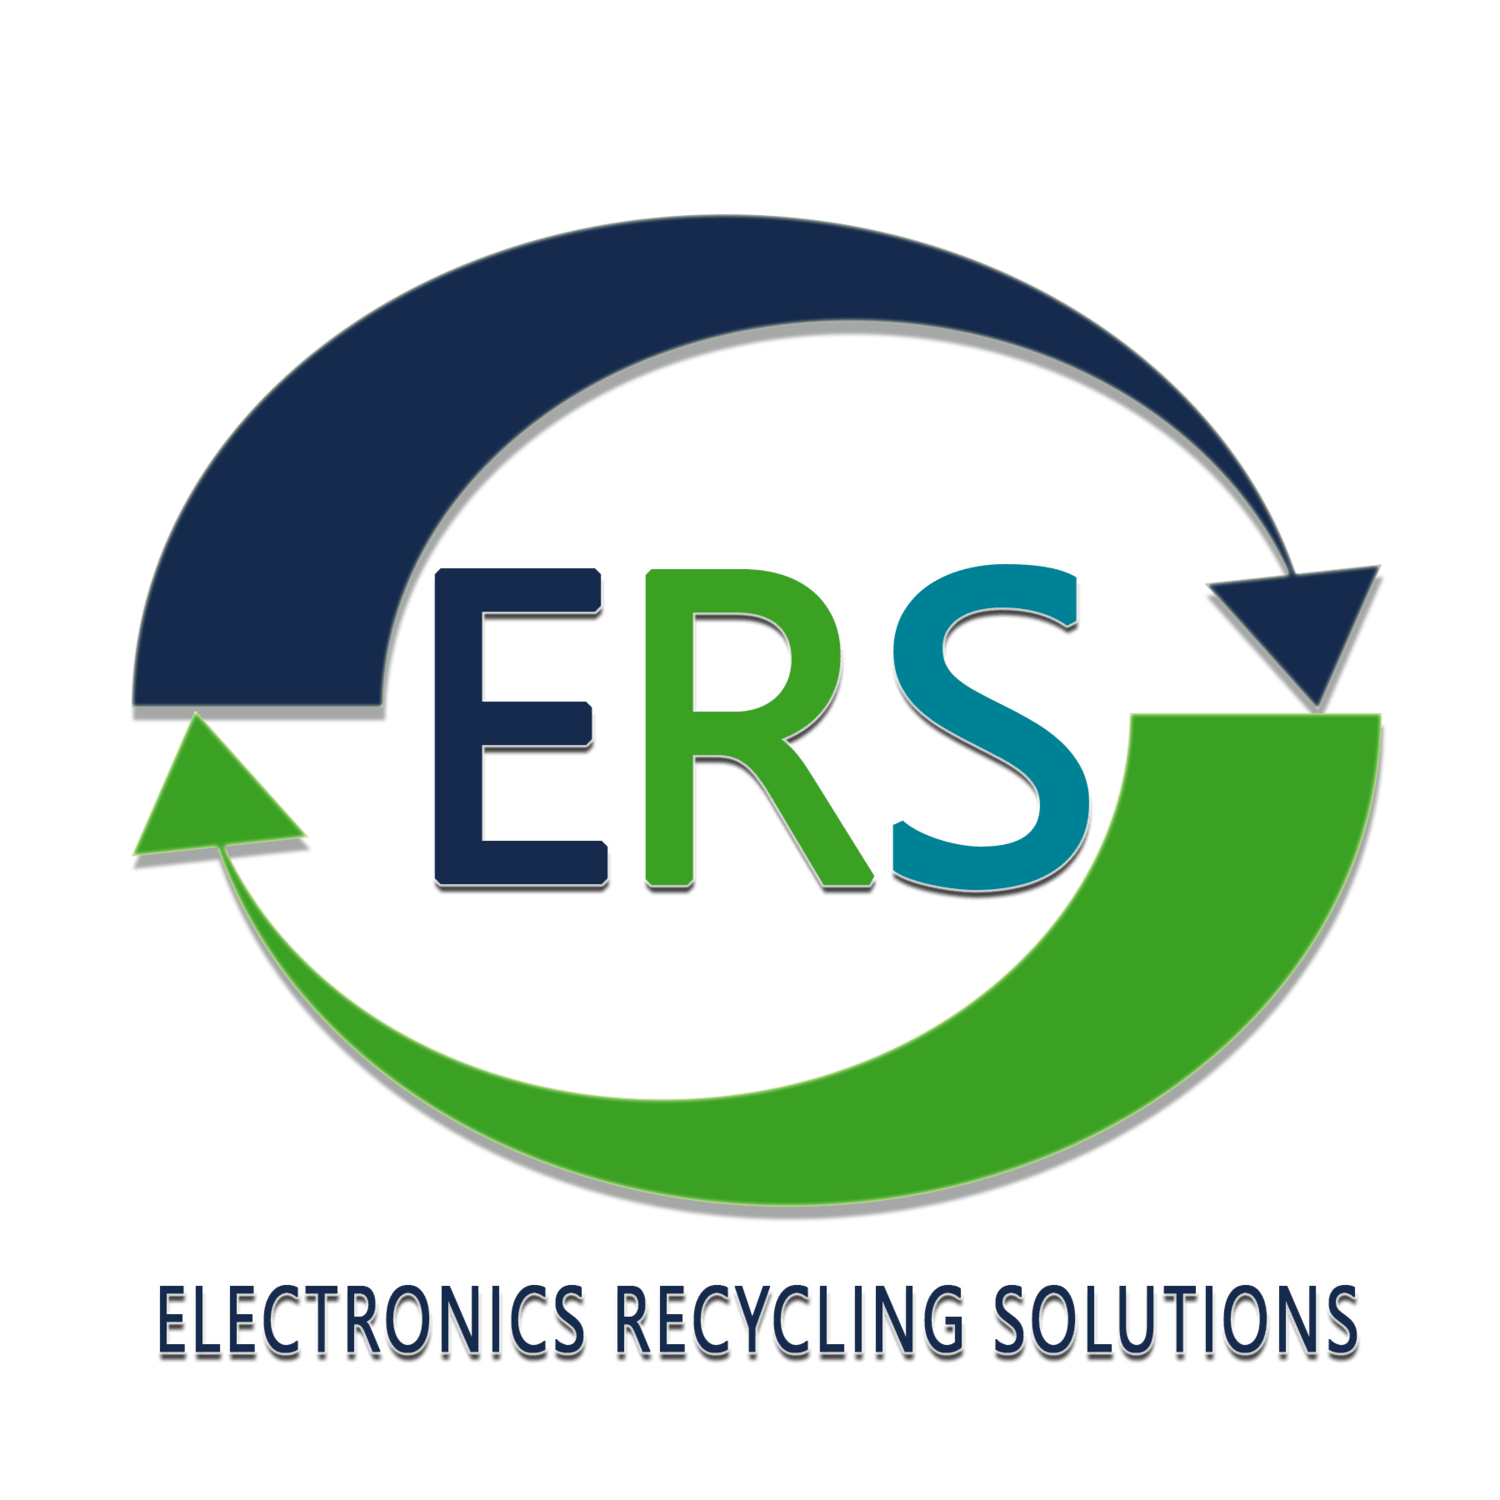 Ers Logo - Electronics Recycling Solutions. Jobs and Autism